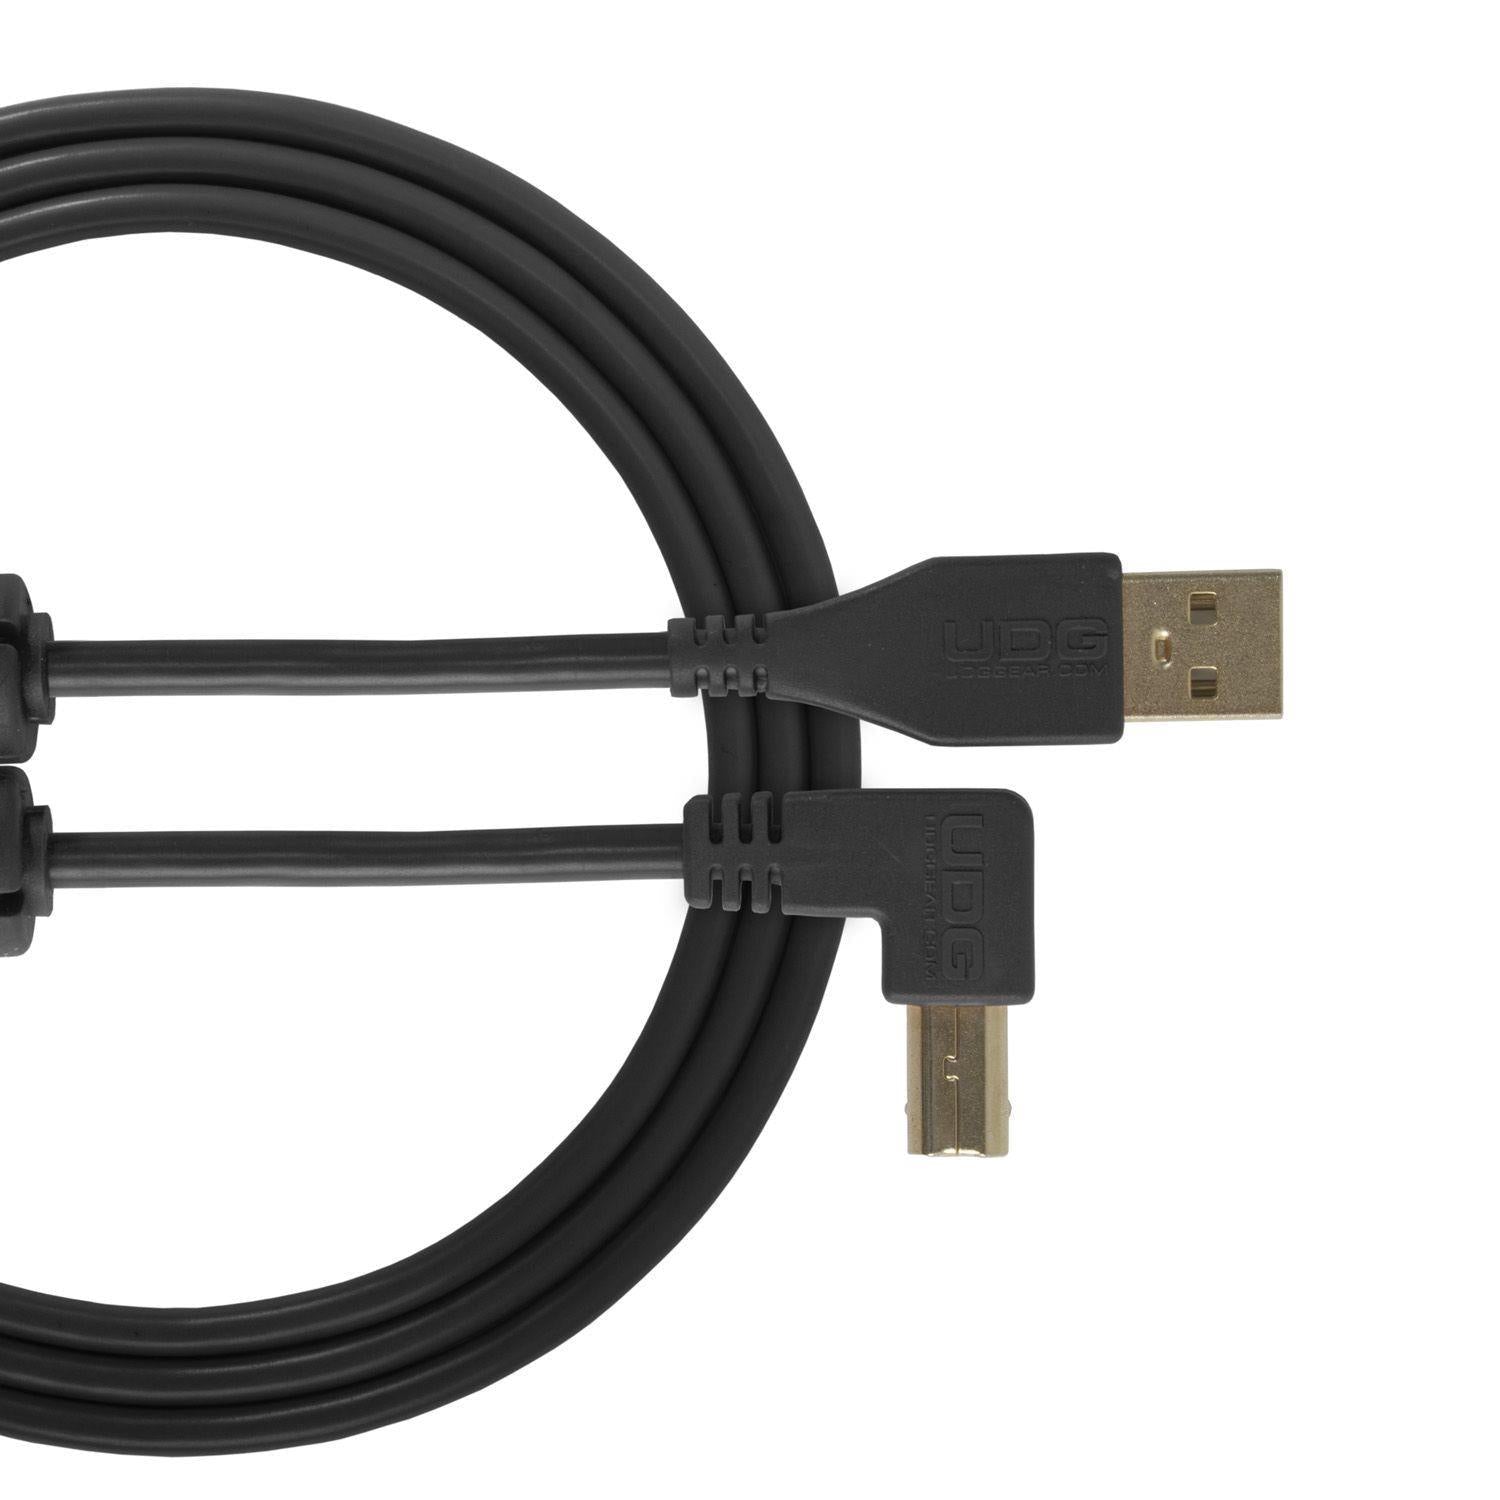 UDG Ultimate Audio Cable USB 2.0 A-B Black Angled 3m - DY Pro Audio